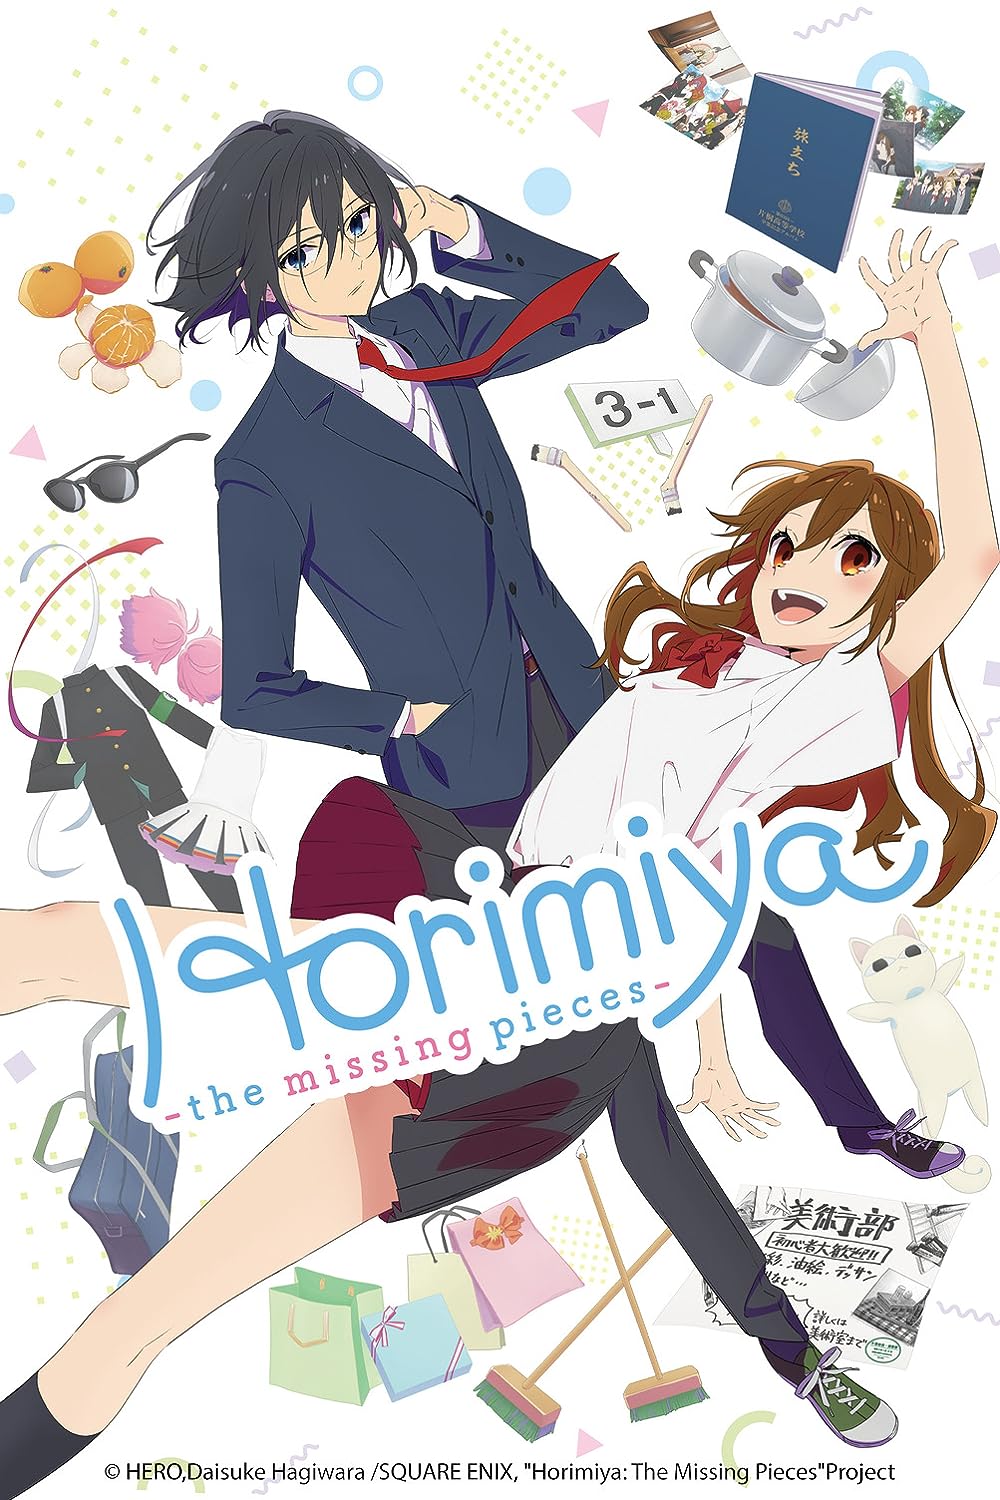 Horimiya: The Missing Pieces Episode 13 Review - But Why Tho?